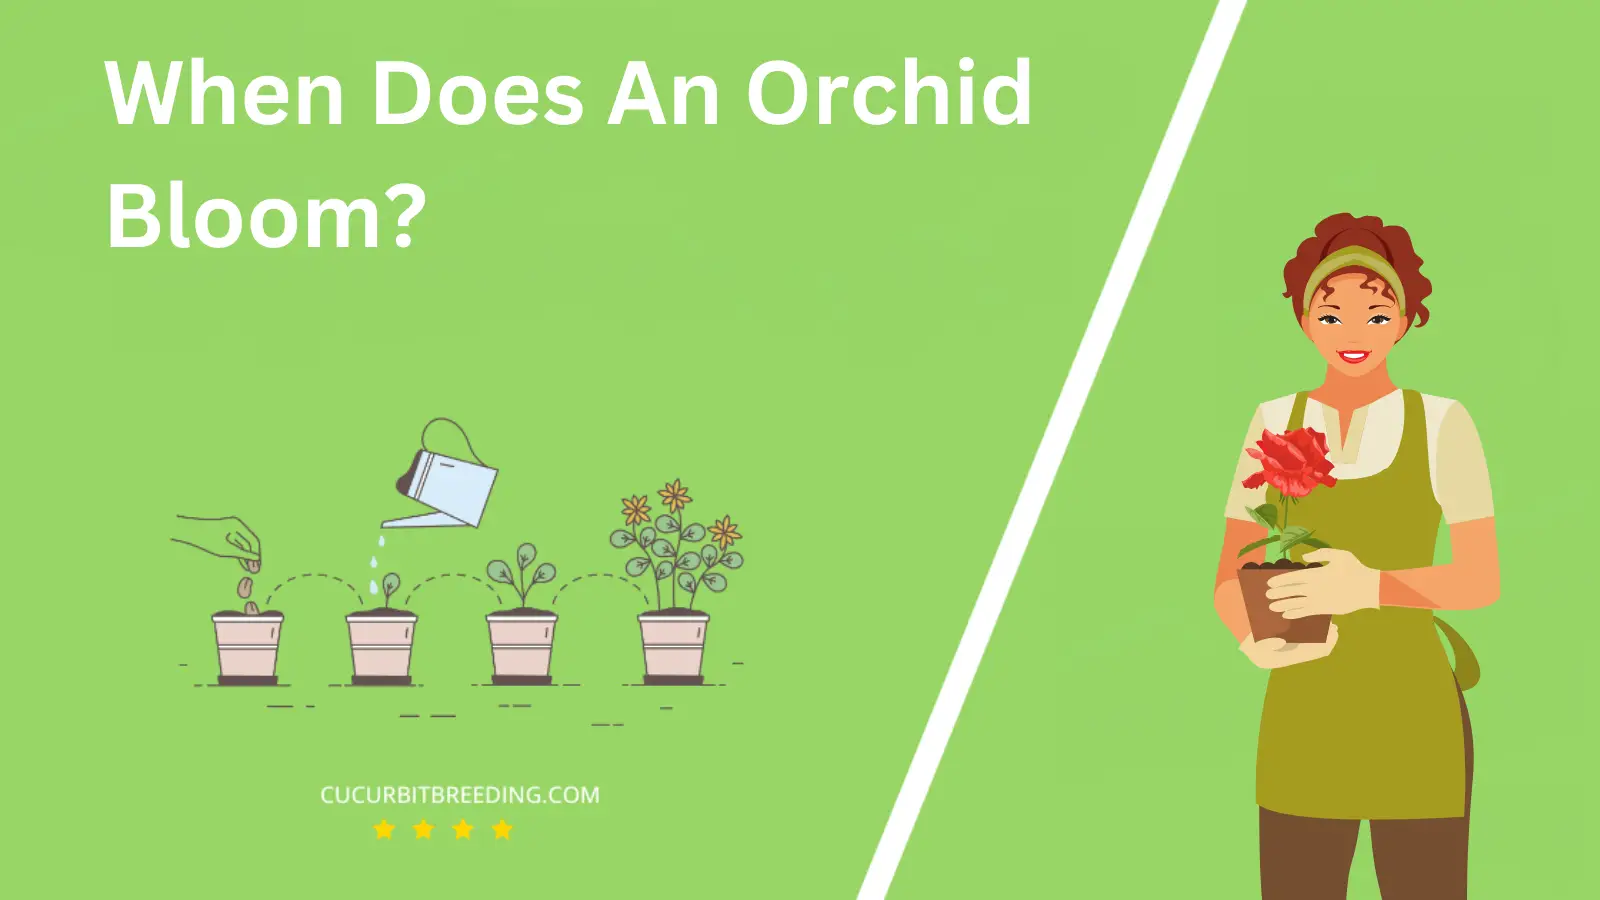 When Does An Orchid Bloom?